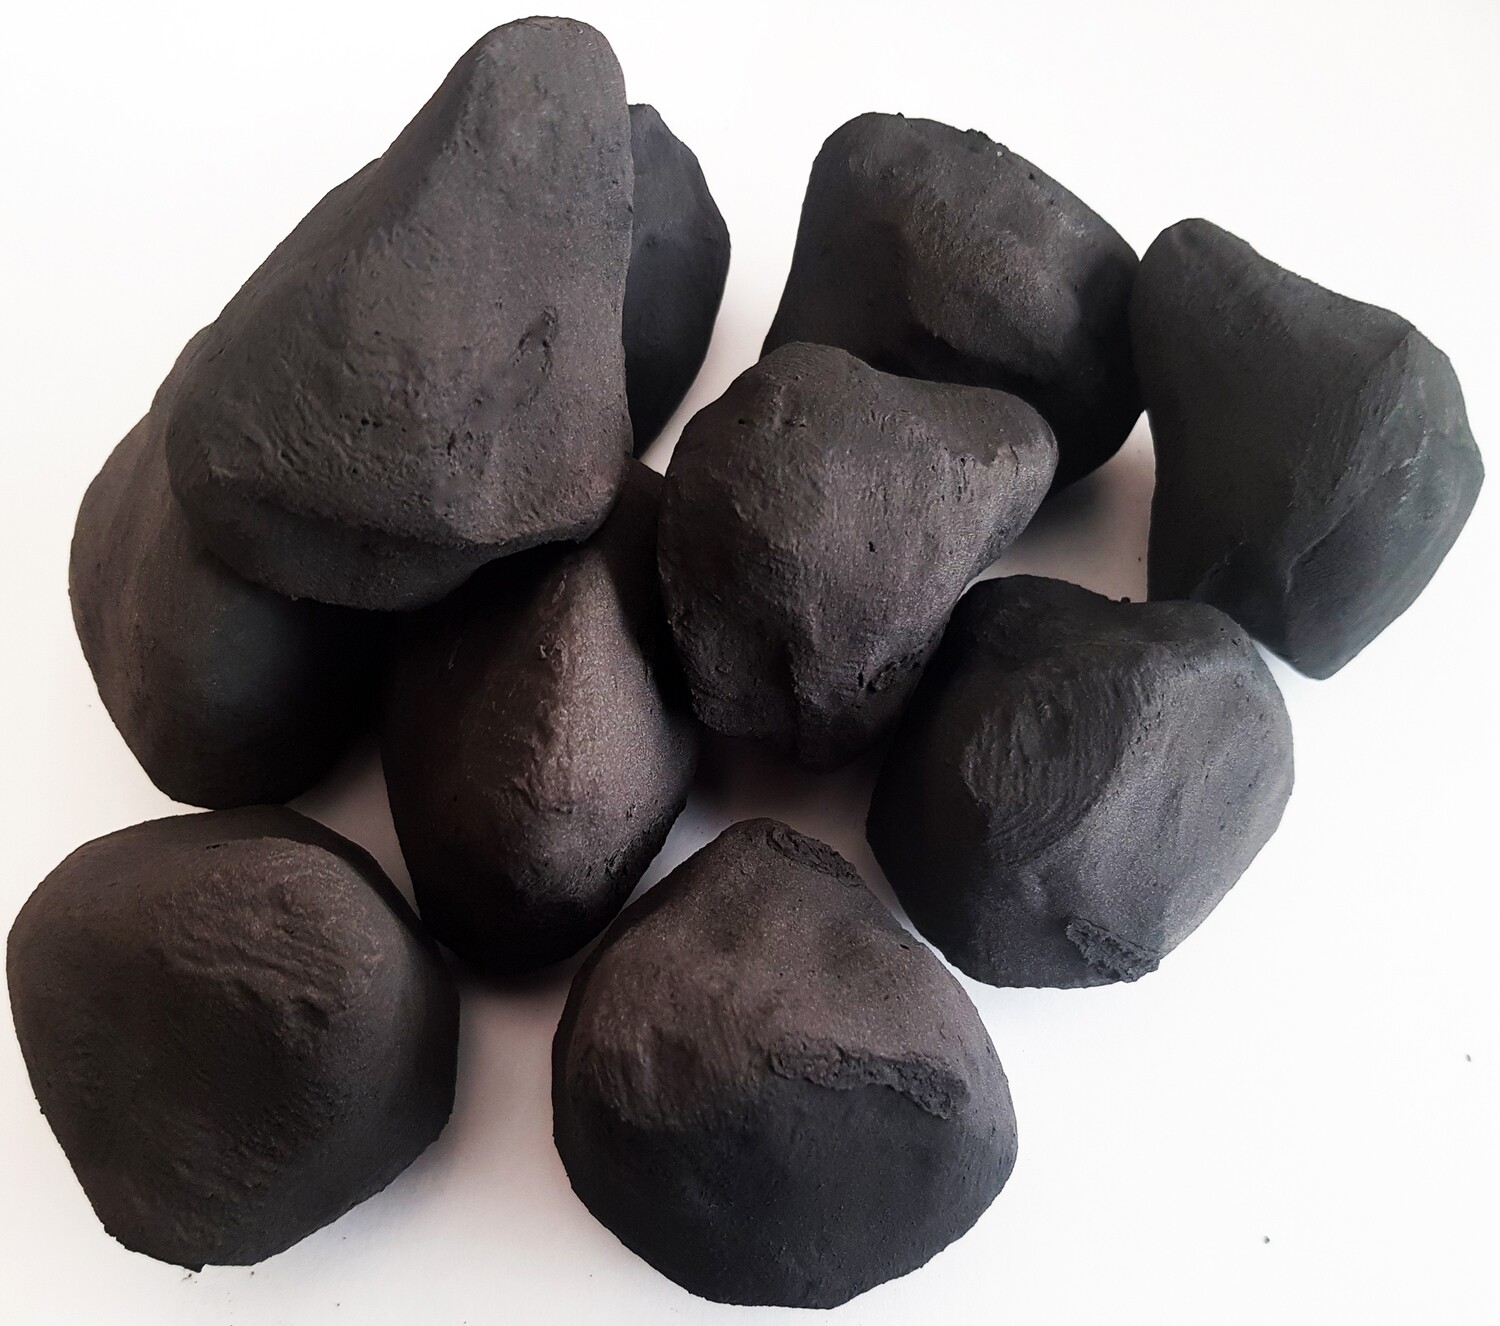 Black coals 4 you 2 packs of coals 10 small & 10 medium Gas fire Replacements/Bio Fuels/Real flame in packing 